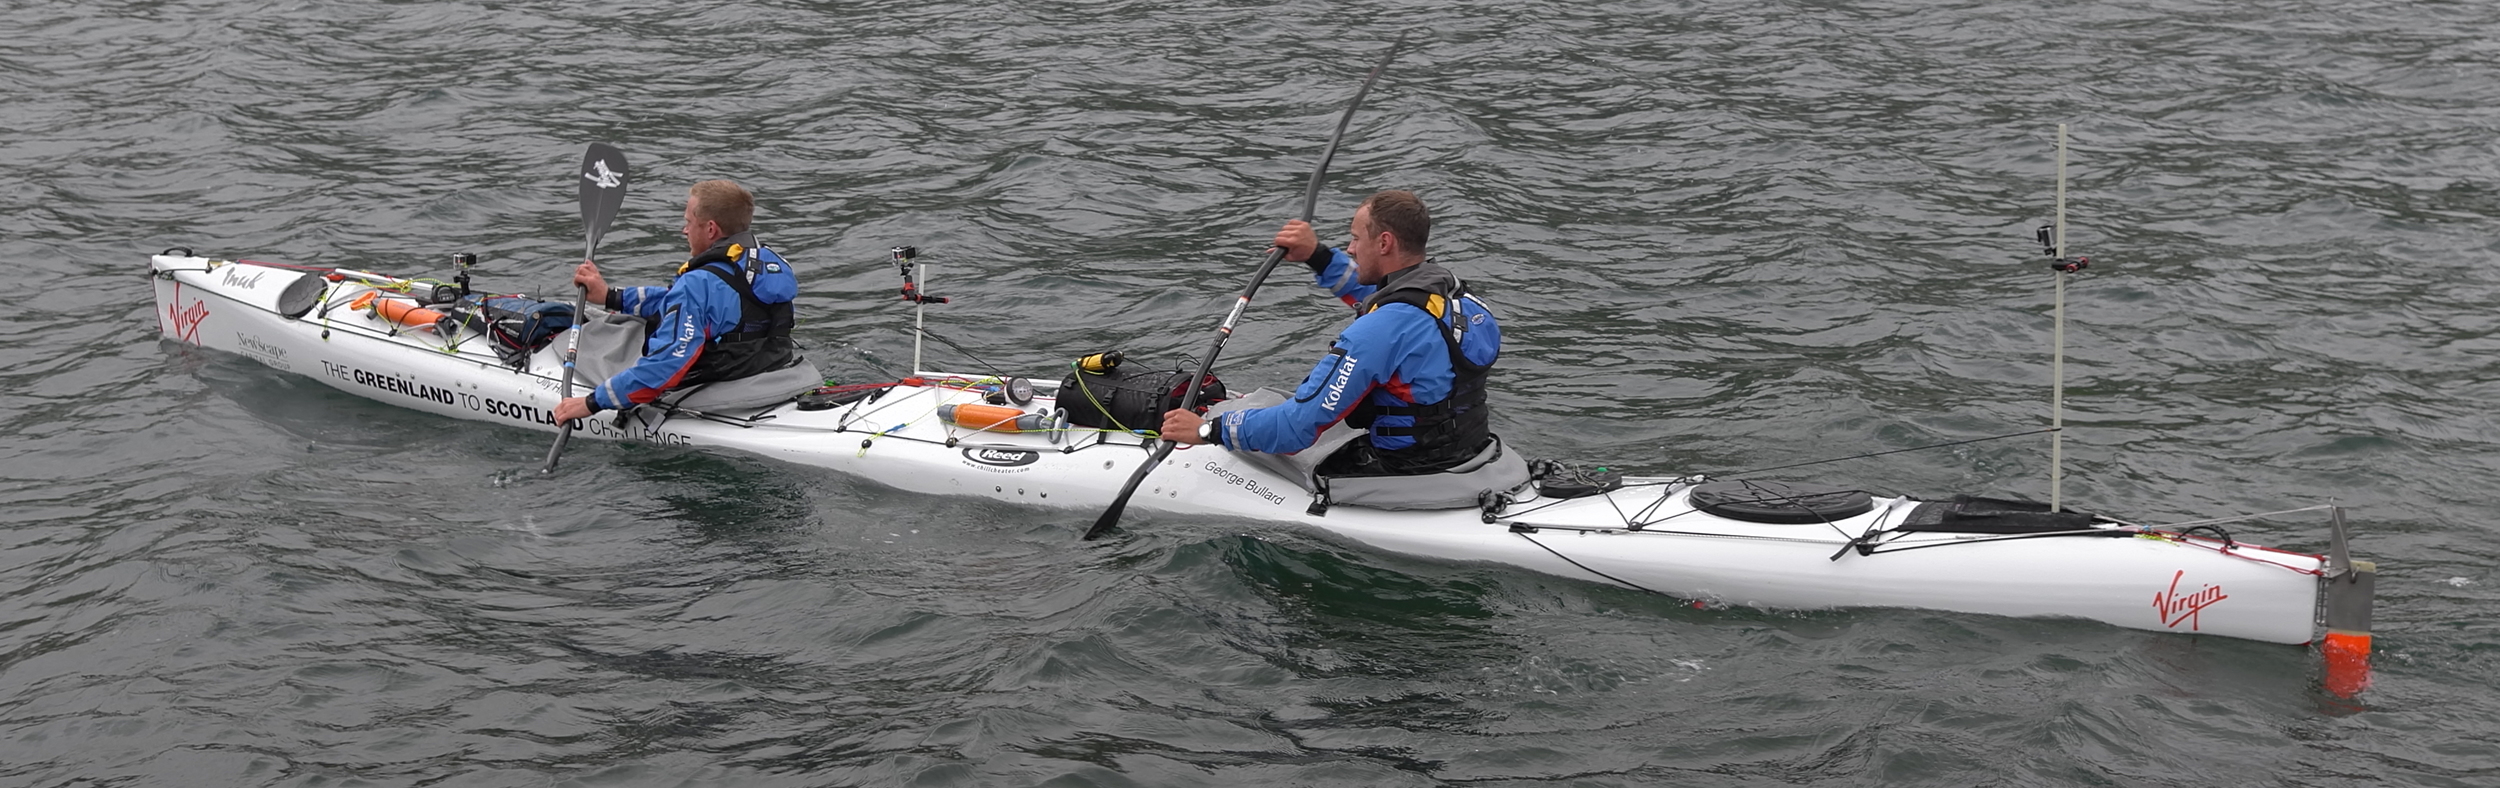 Tahe Marine Greenland T - Paddling Superstore - Your Kayaking Specialists